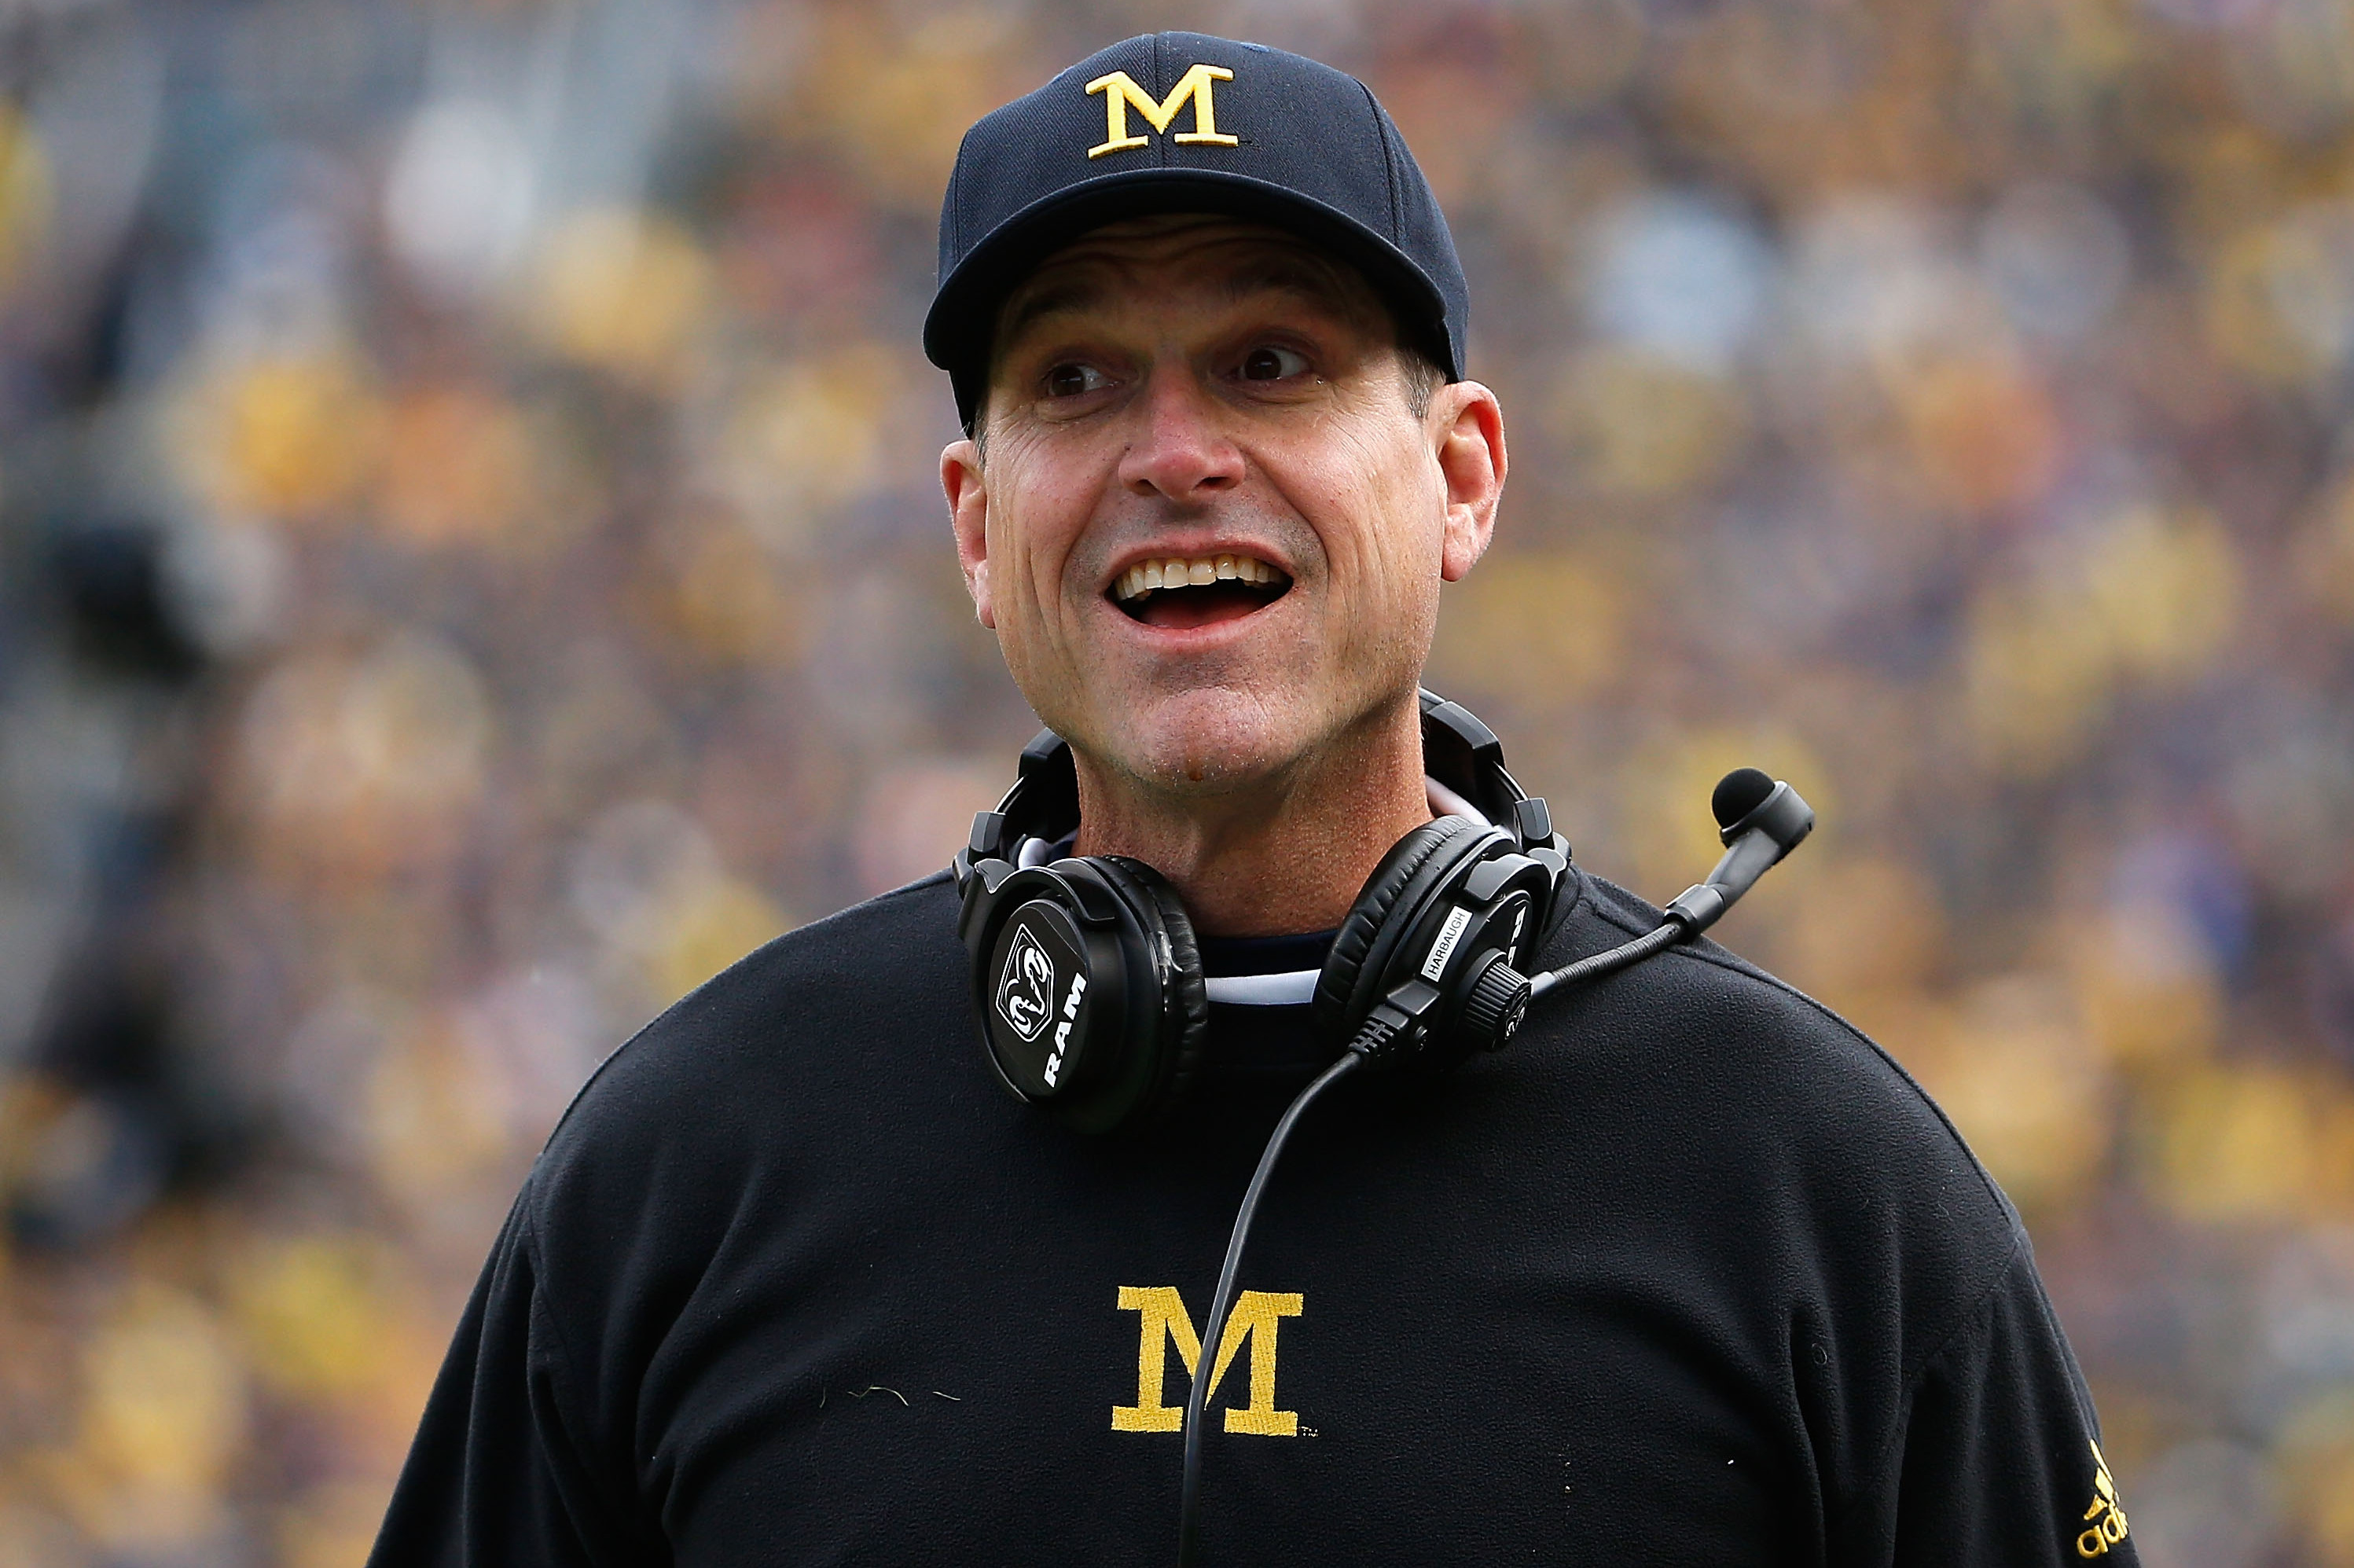 247Sports LIVE: Jim Harbaugh OUT, Michigan Rumors, Ohio State Buzz